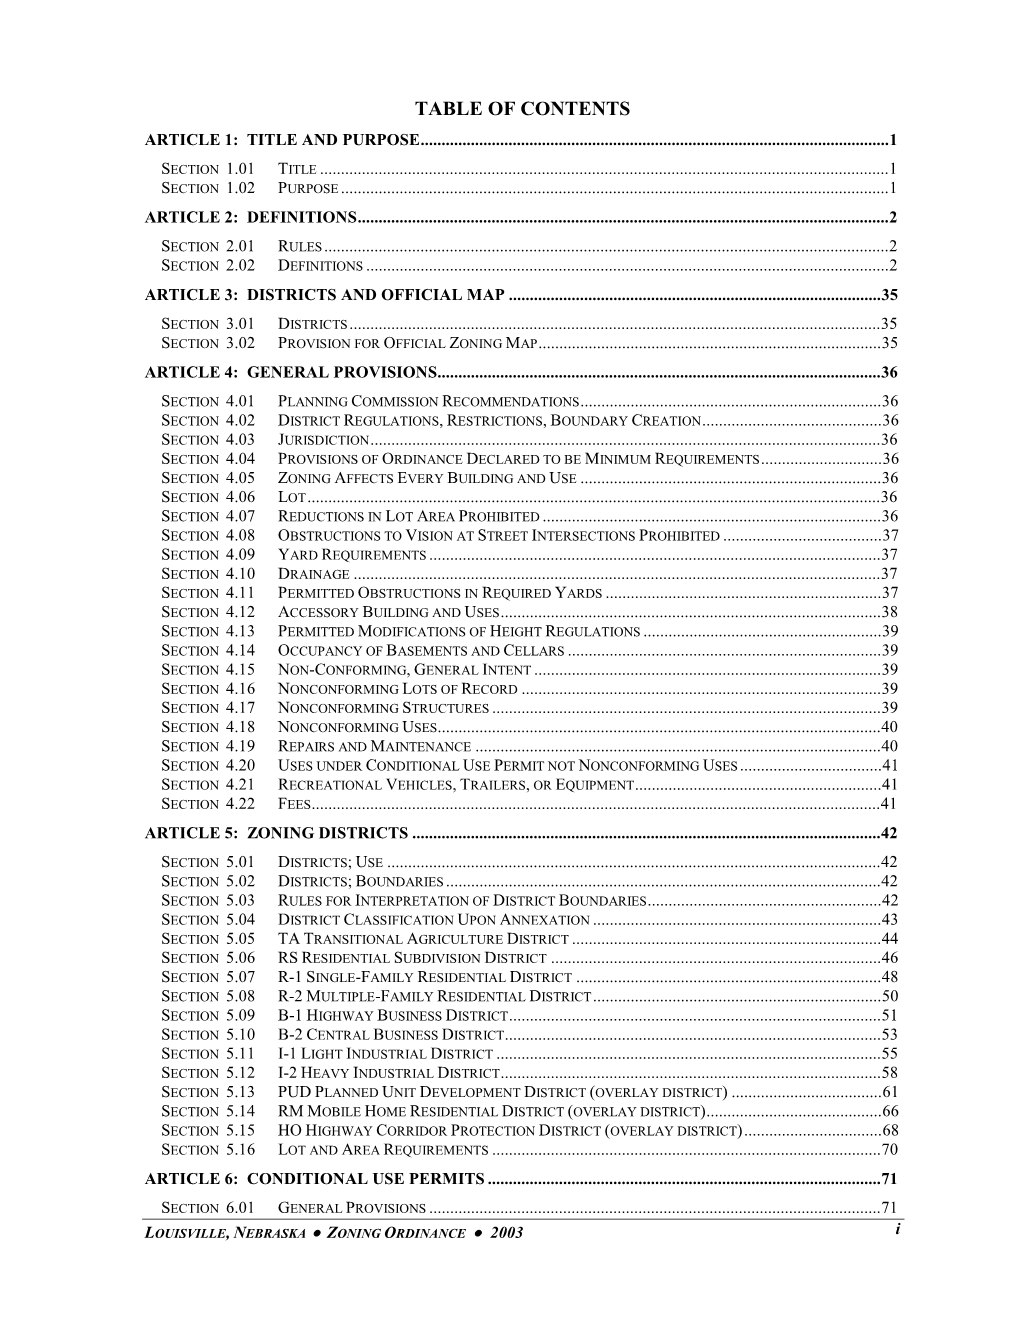 Table of Contents Article 1: Title and Purpose